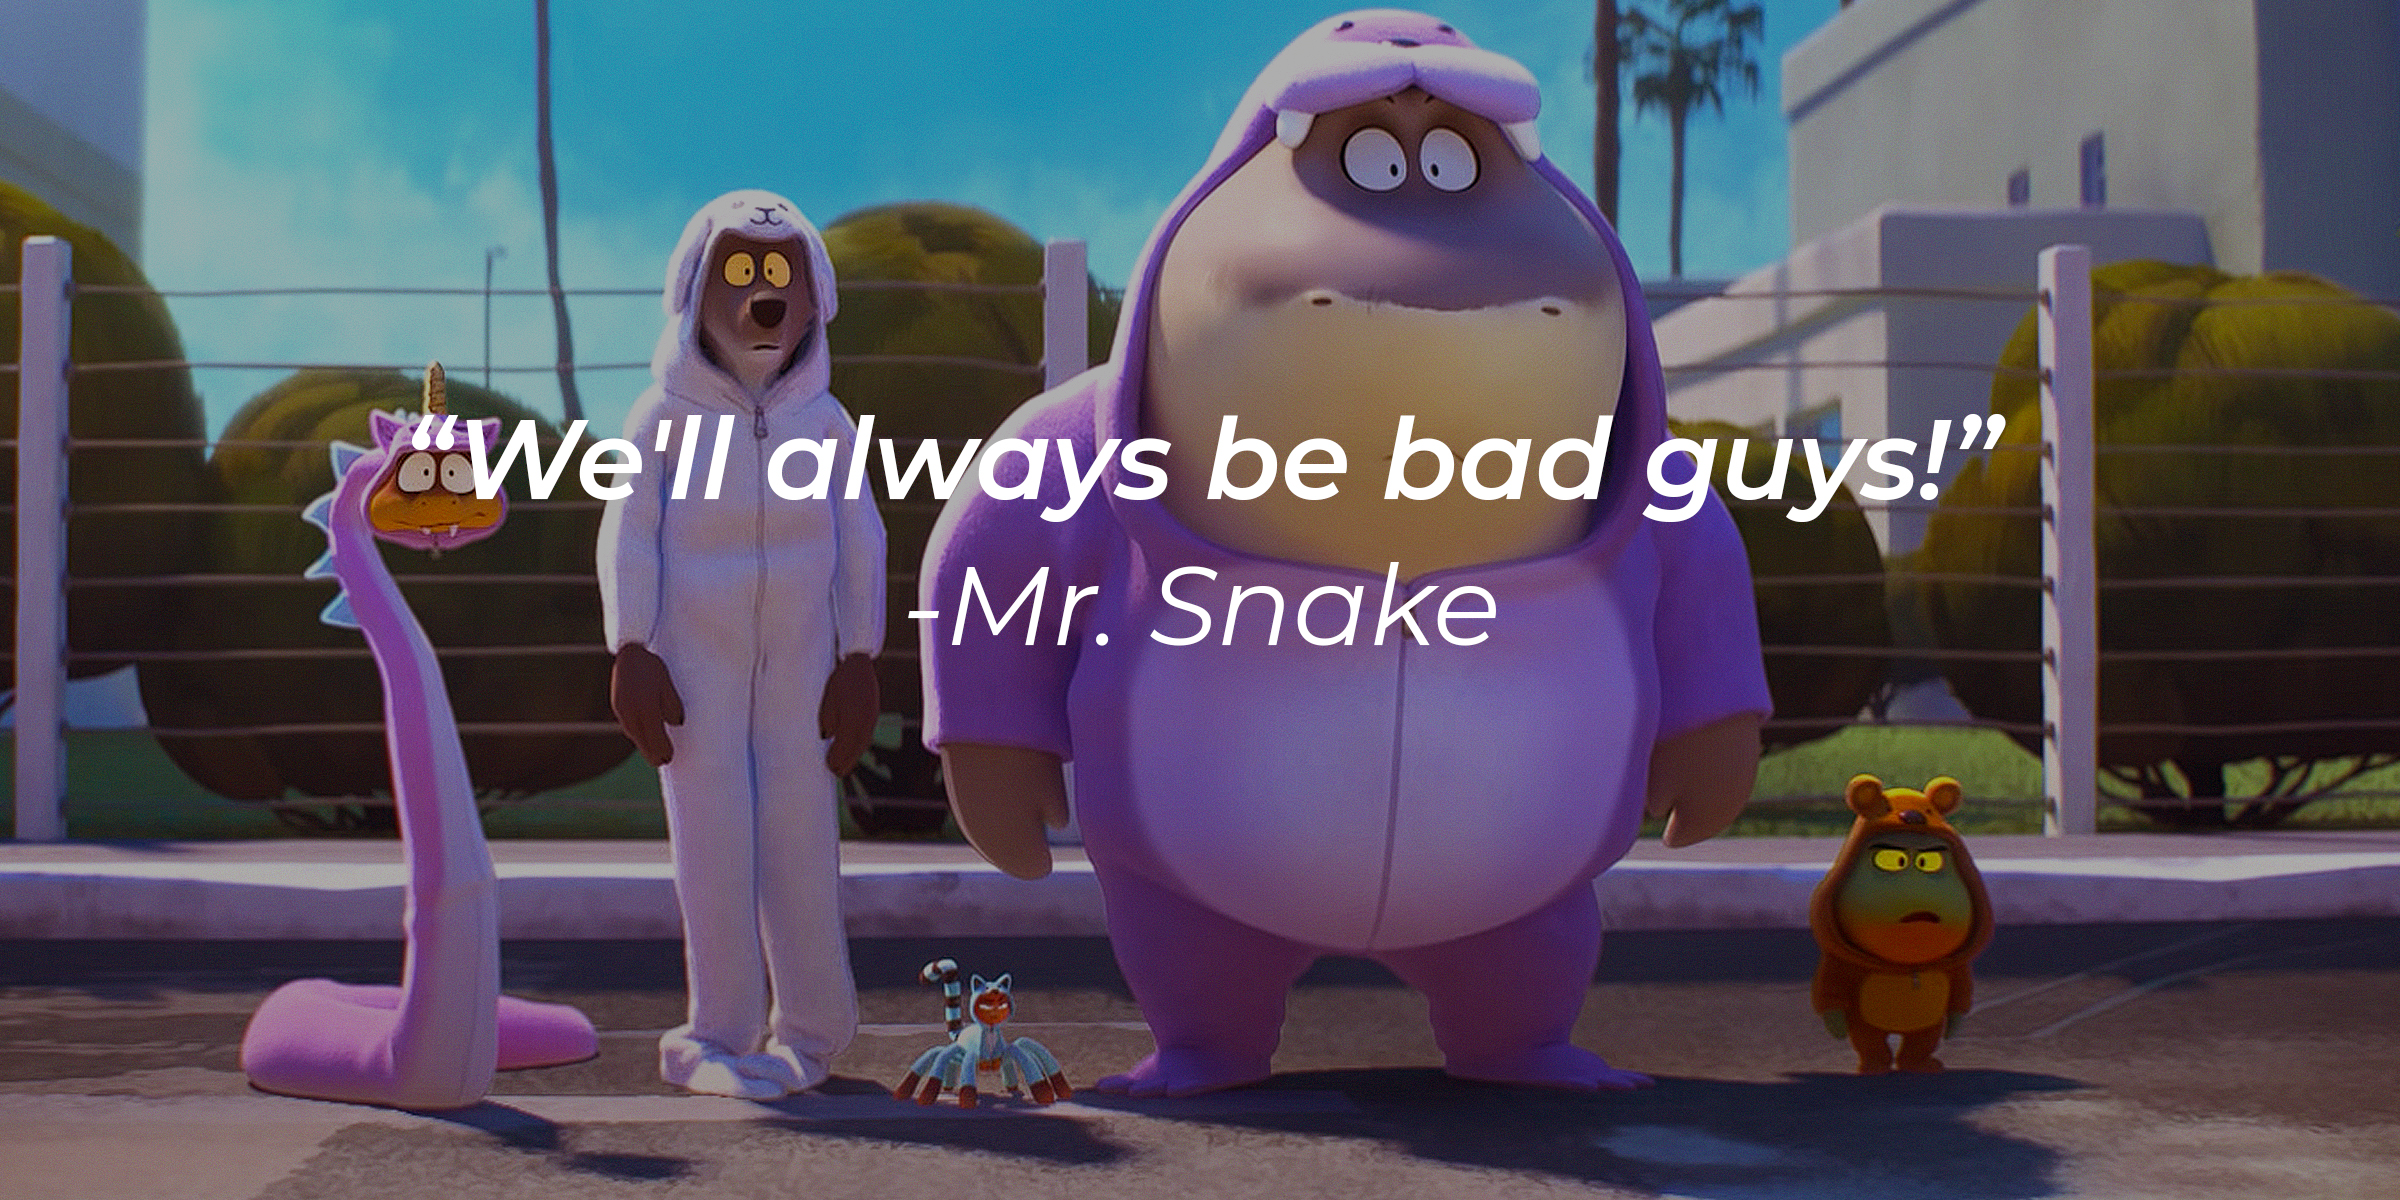 An image of "The Bad Guys" characters with Mr. Snake's quote: "We'll always be bad guys!" | Source: youtube.com/UniversalPictures